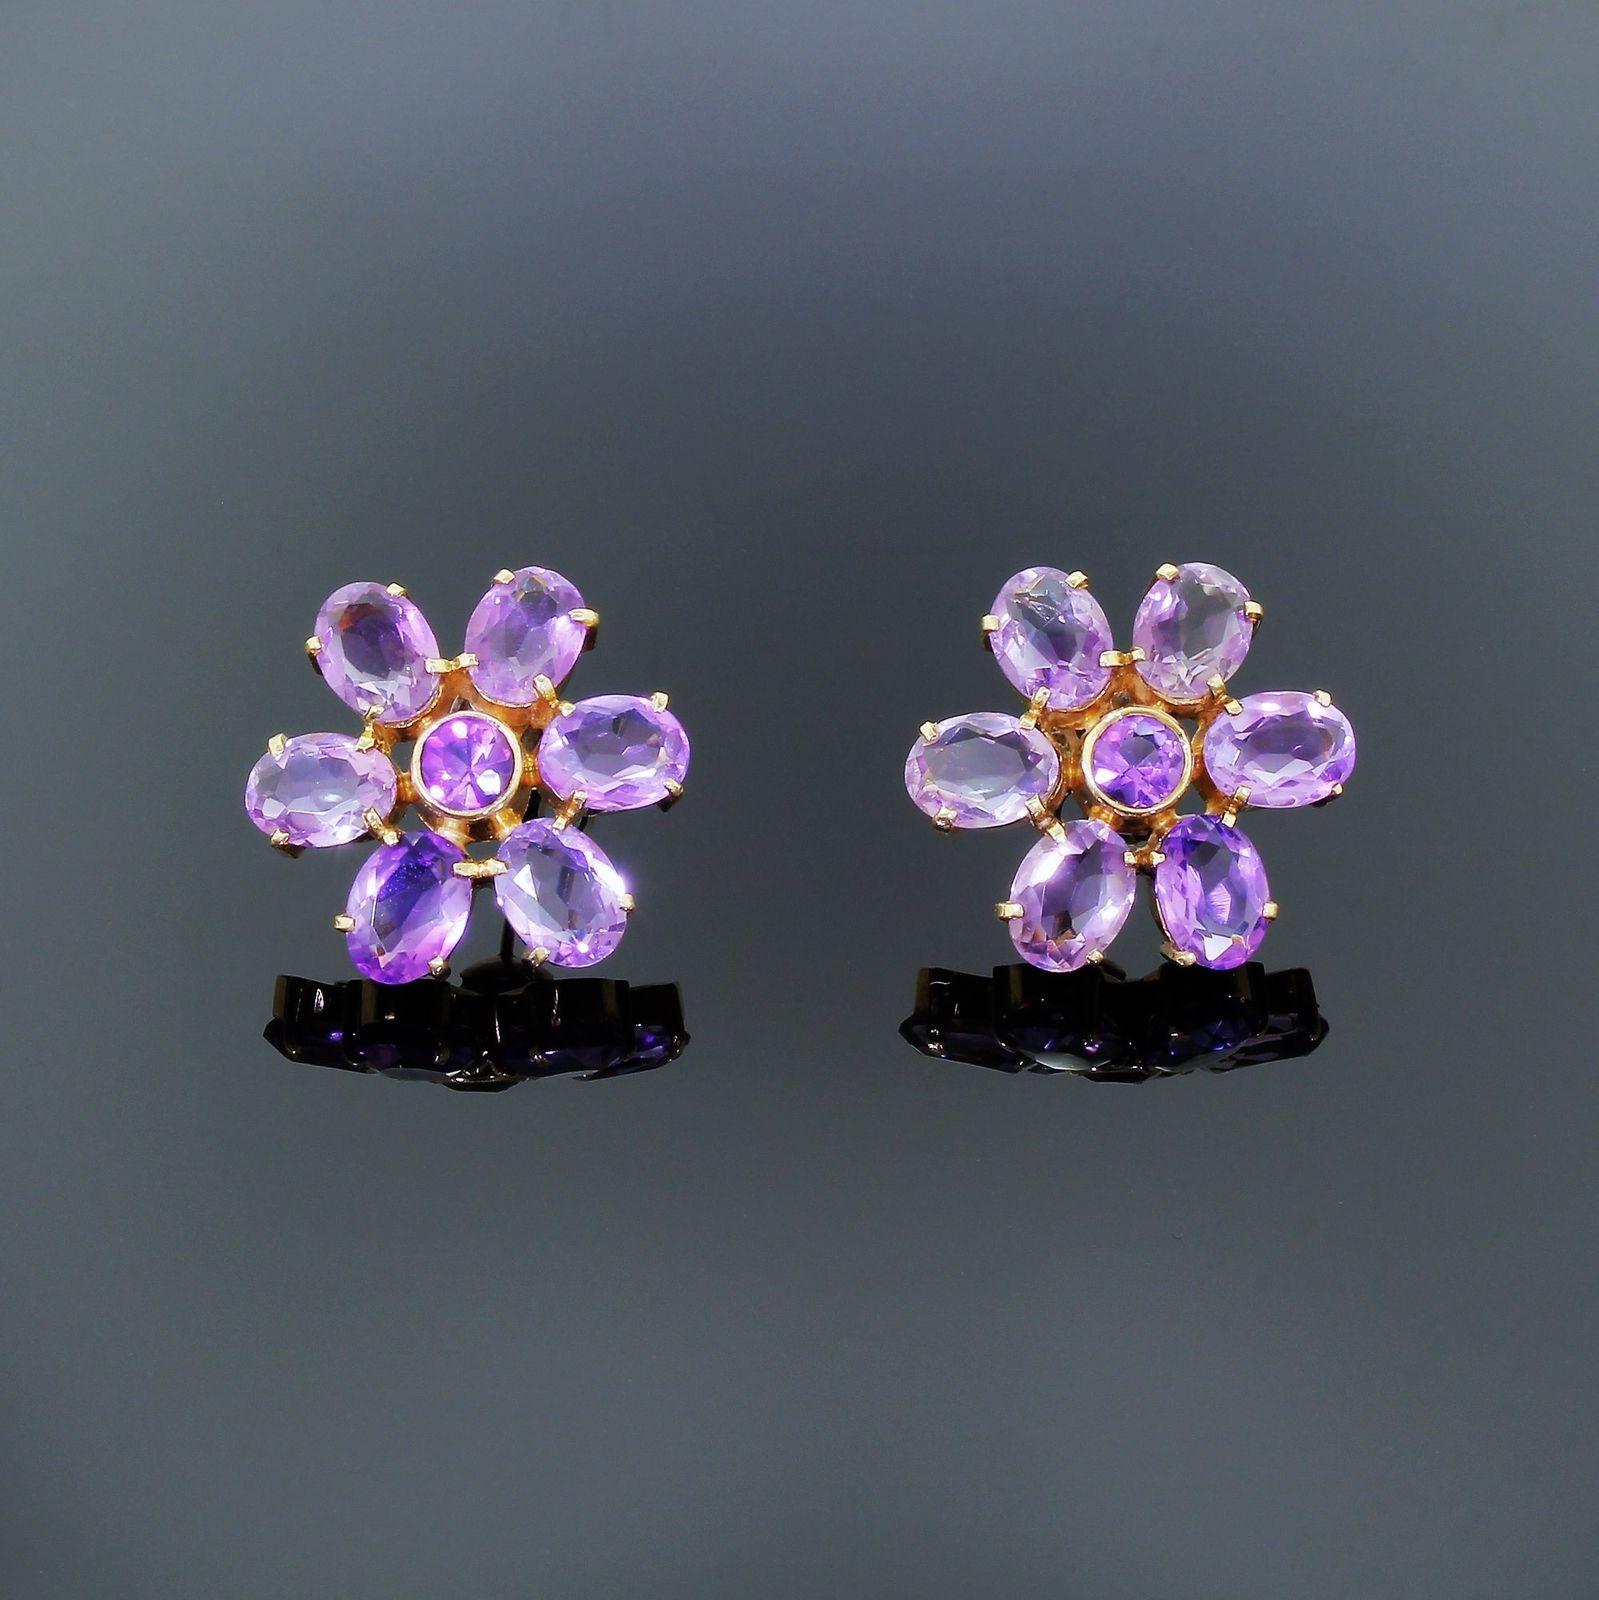 Beautiful 14k gold Amethyst cluster floral earrings, perfect for any season.
These are in beautiful condition, the stones glint and sparkle with the smallest movement. Very eye catching.
The earrings consist of six 8x6mm oval amethysts per earring